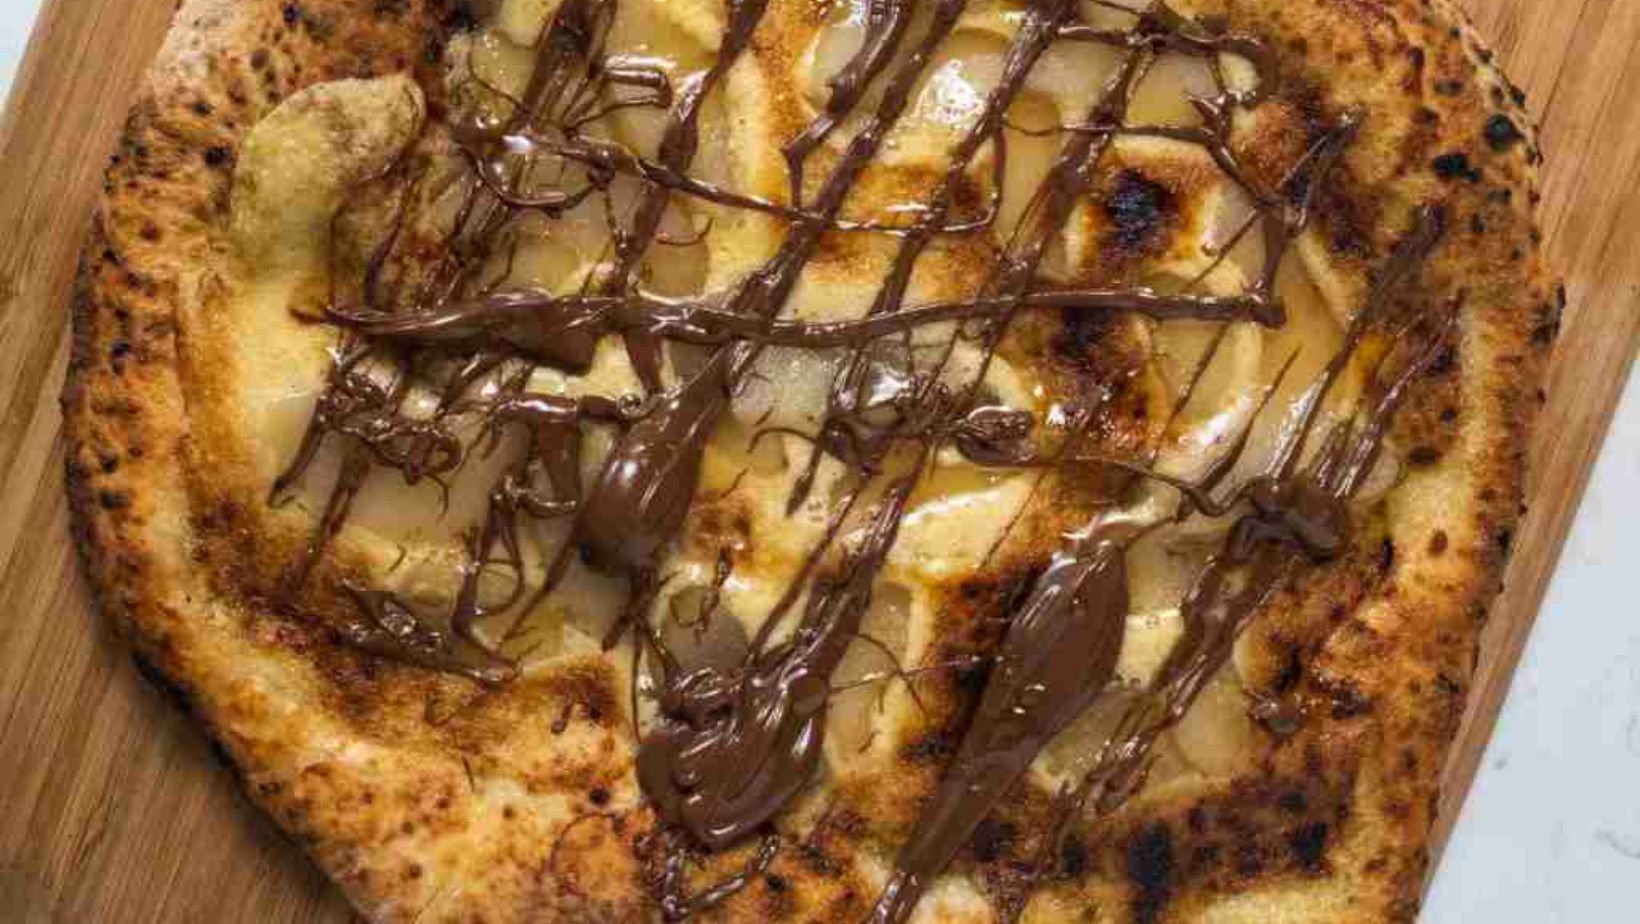 A Pizza on a wooden board covered with poached pears and swirls of Nutella